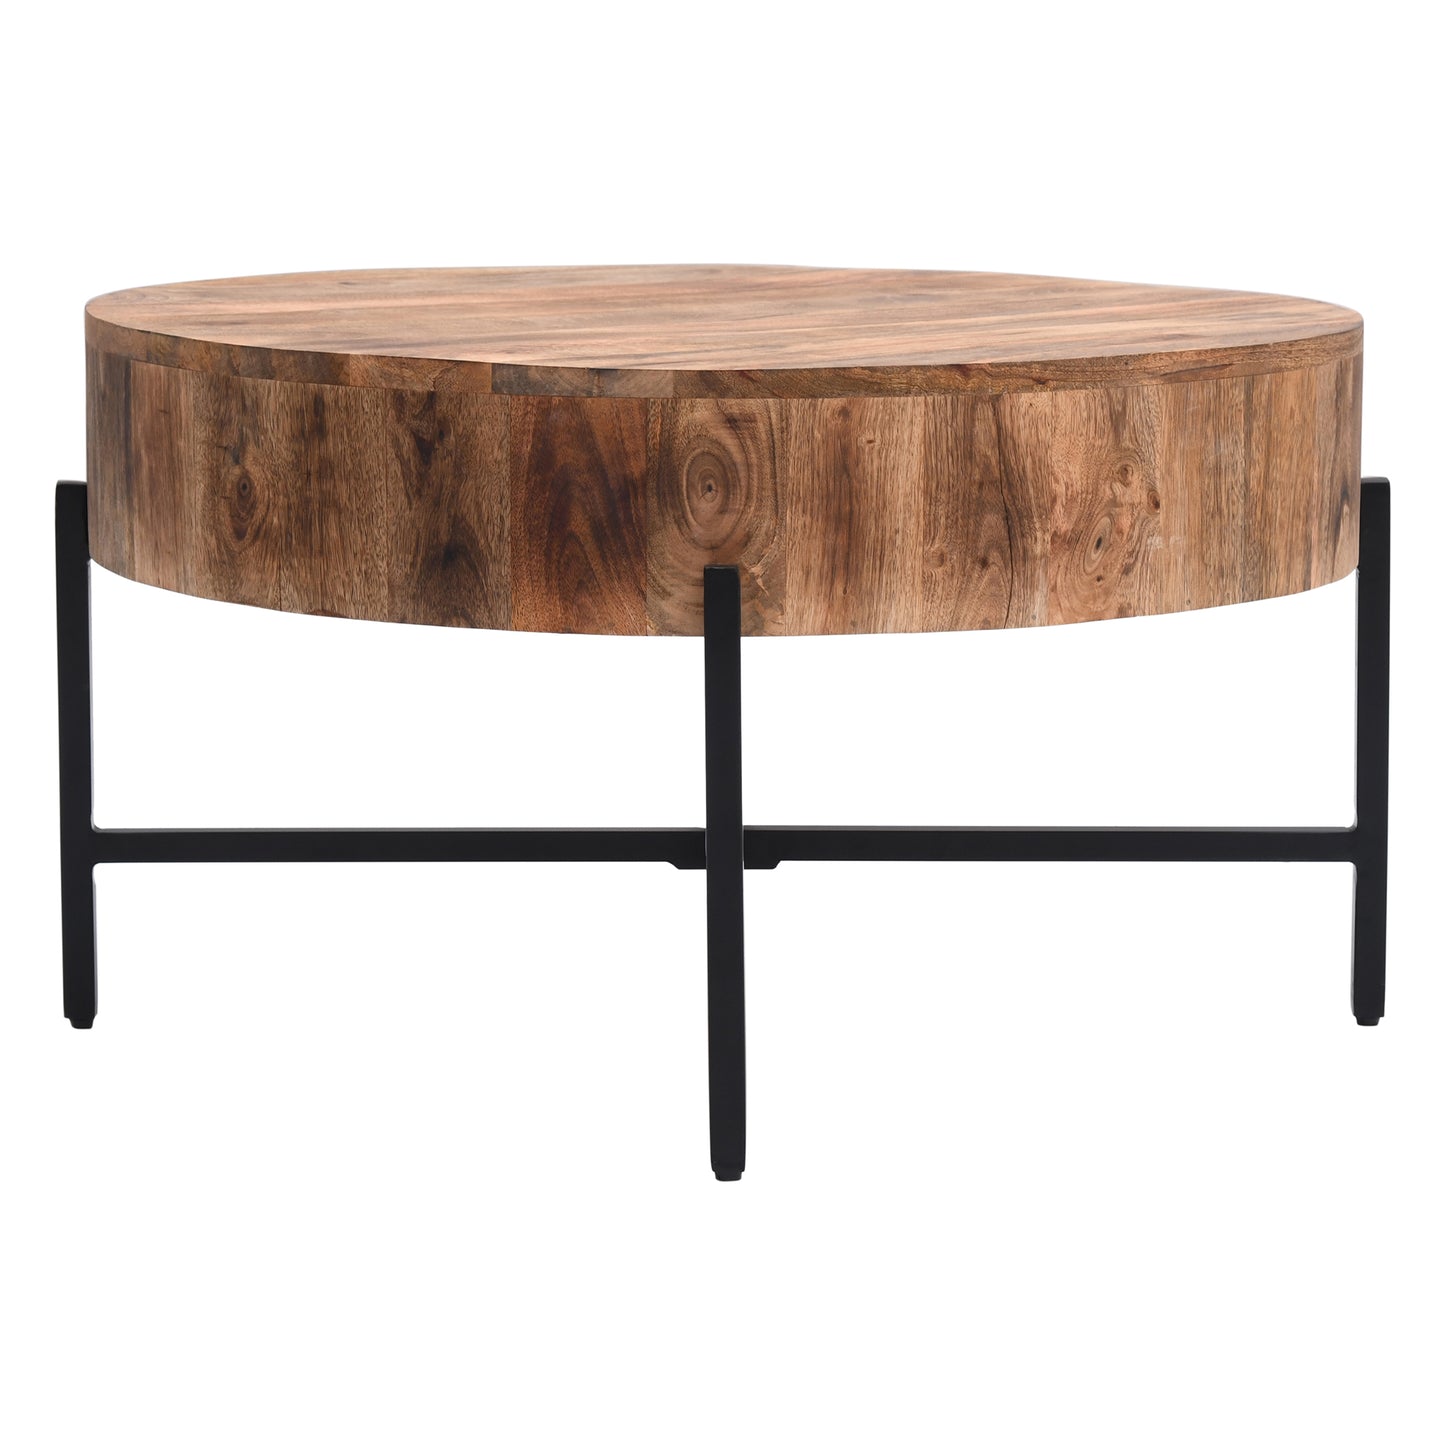 Blox Round Coffee Table in Natural and Black